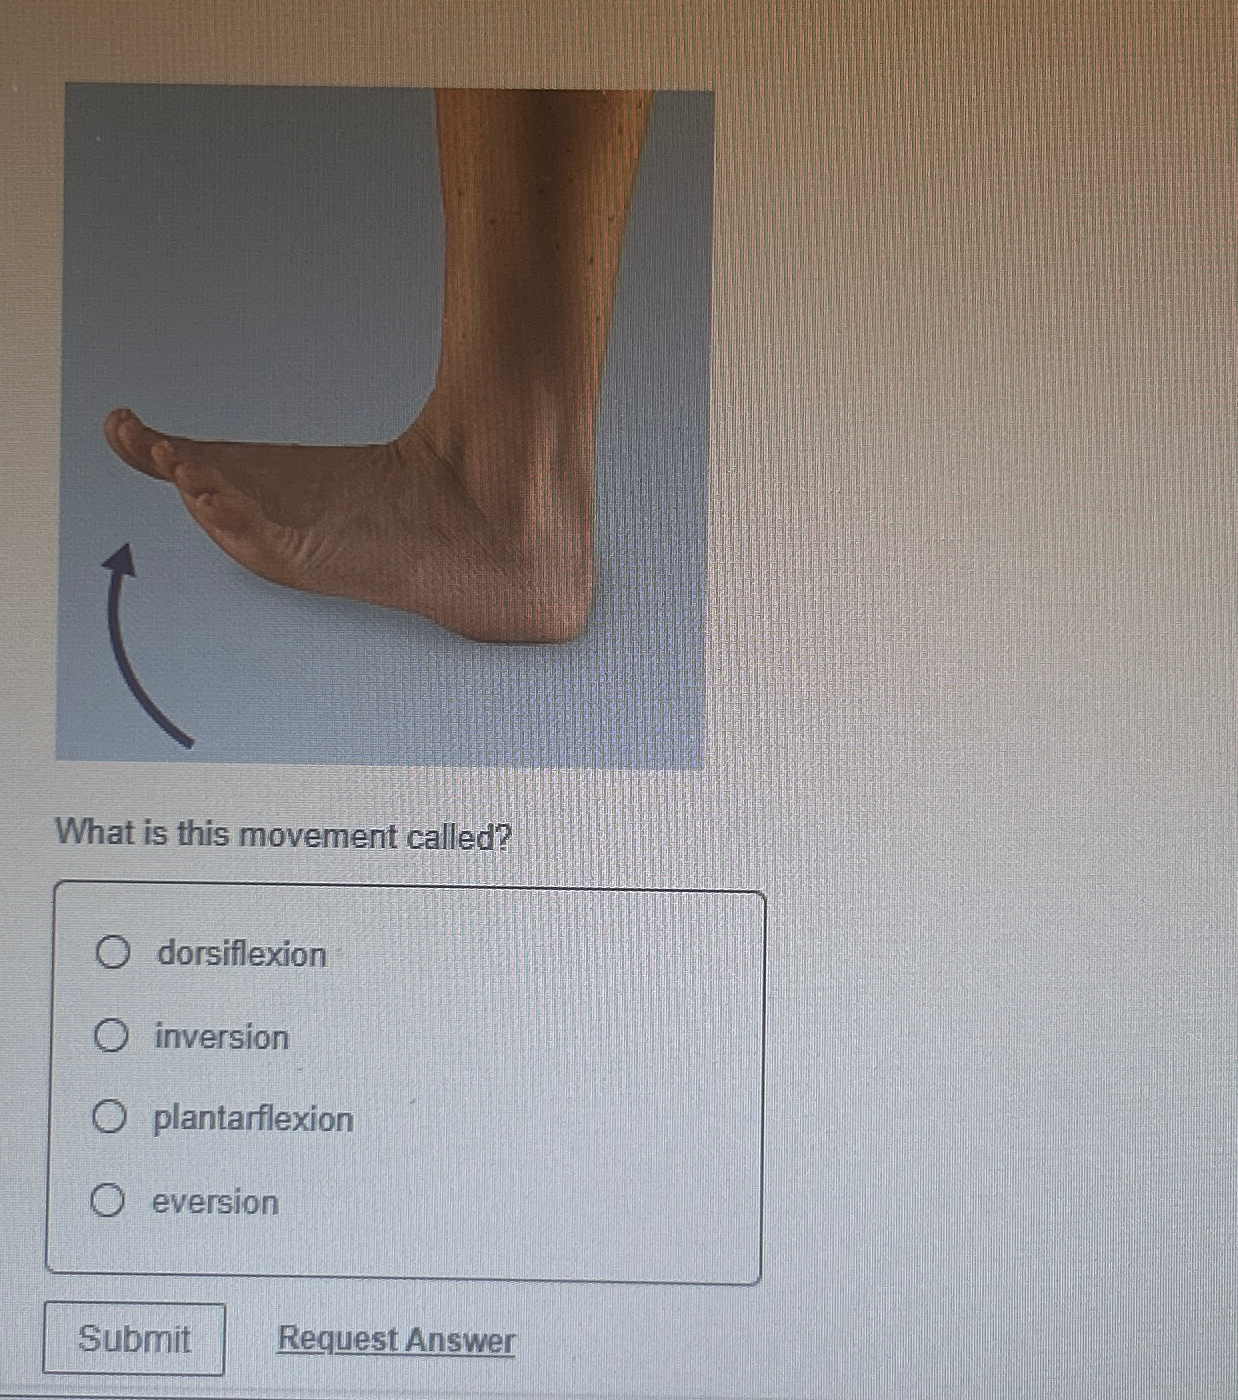 Special movements of the foot can be classified as dorsiflexion